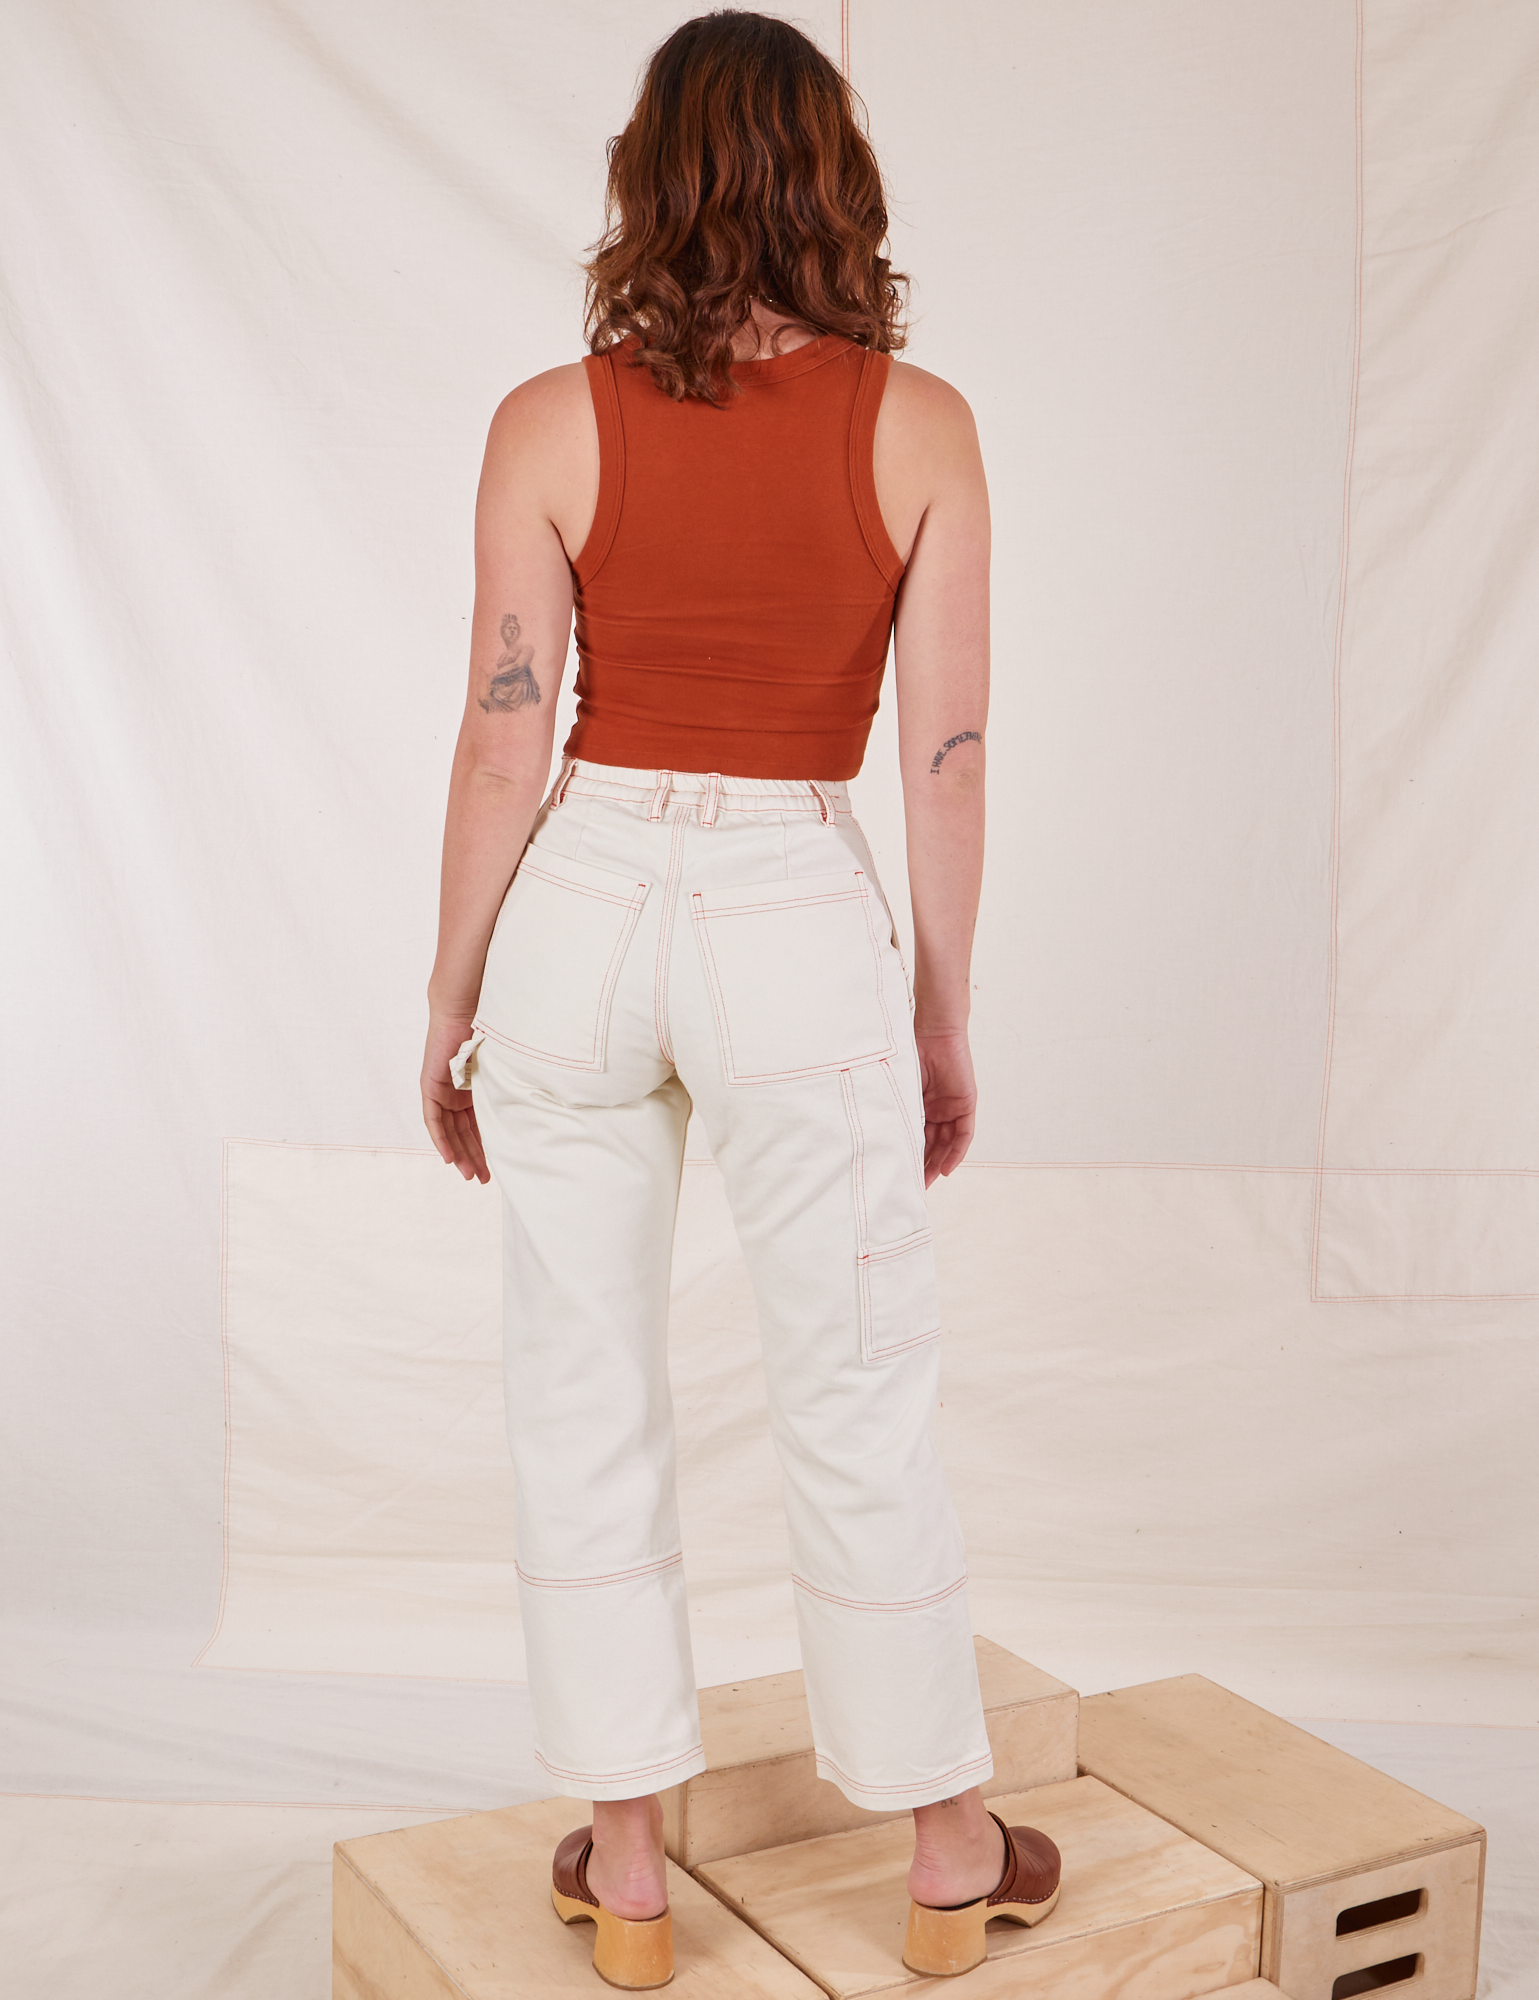 Back view of Carpenter Jeans in Vintage Off-White and burnt terracotta Cropped Tank Top on Alex